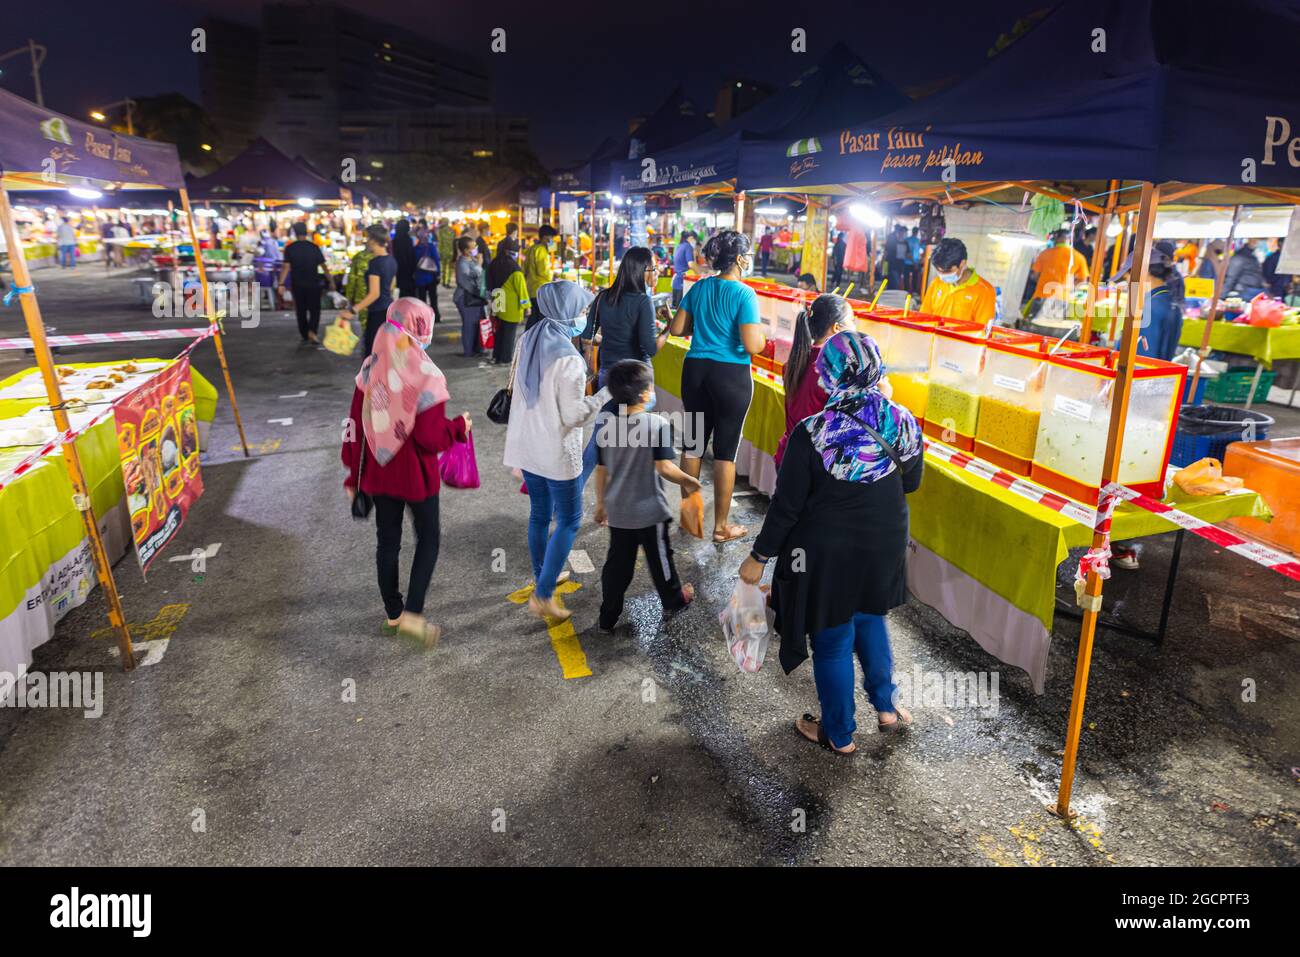 Street food night market at  Putrajaya, near Kuala Lumpur. Muslim Malay family walks between the food stands and carries her purchases in plastic bags Stock Photo